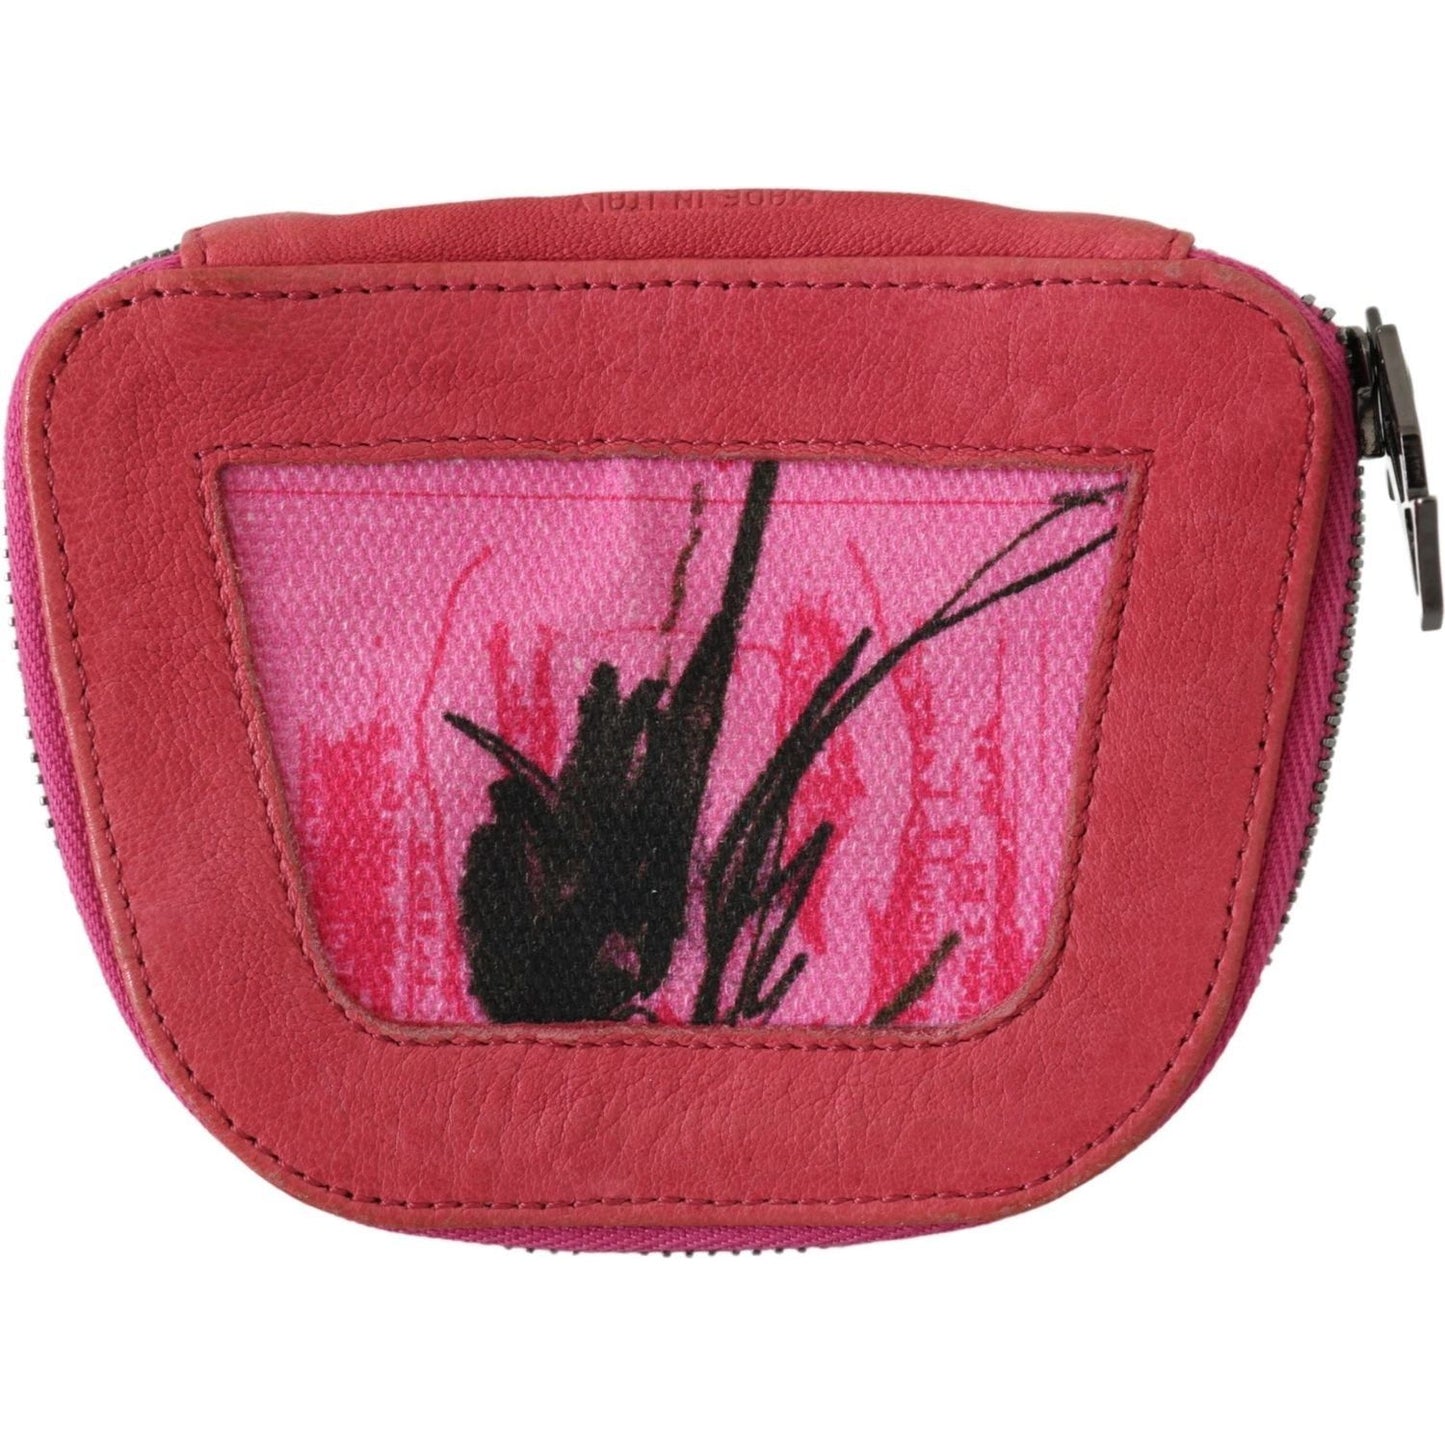 PINKO Elegant Pink Fabric Coin Wallet Purse pink-suede-printed-coin-holder-women-fabric-zippered-purse IMG_0183-scaled-341309a0-7ba.jpg